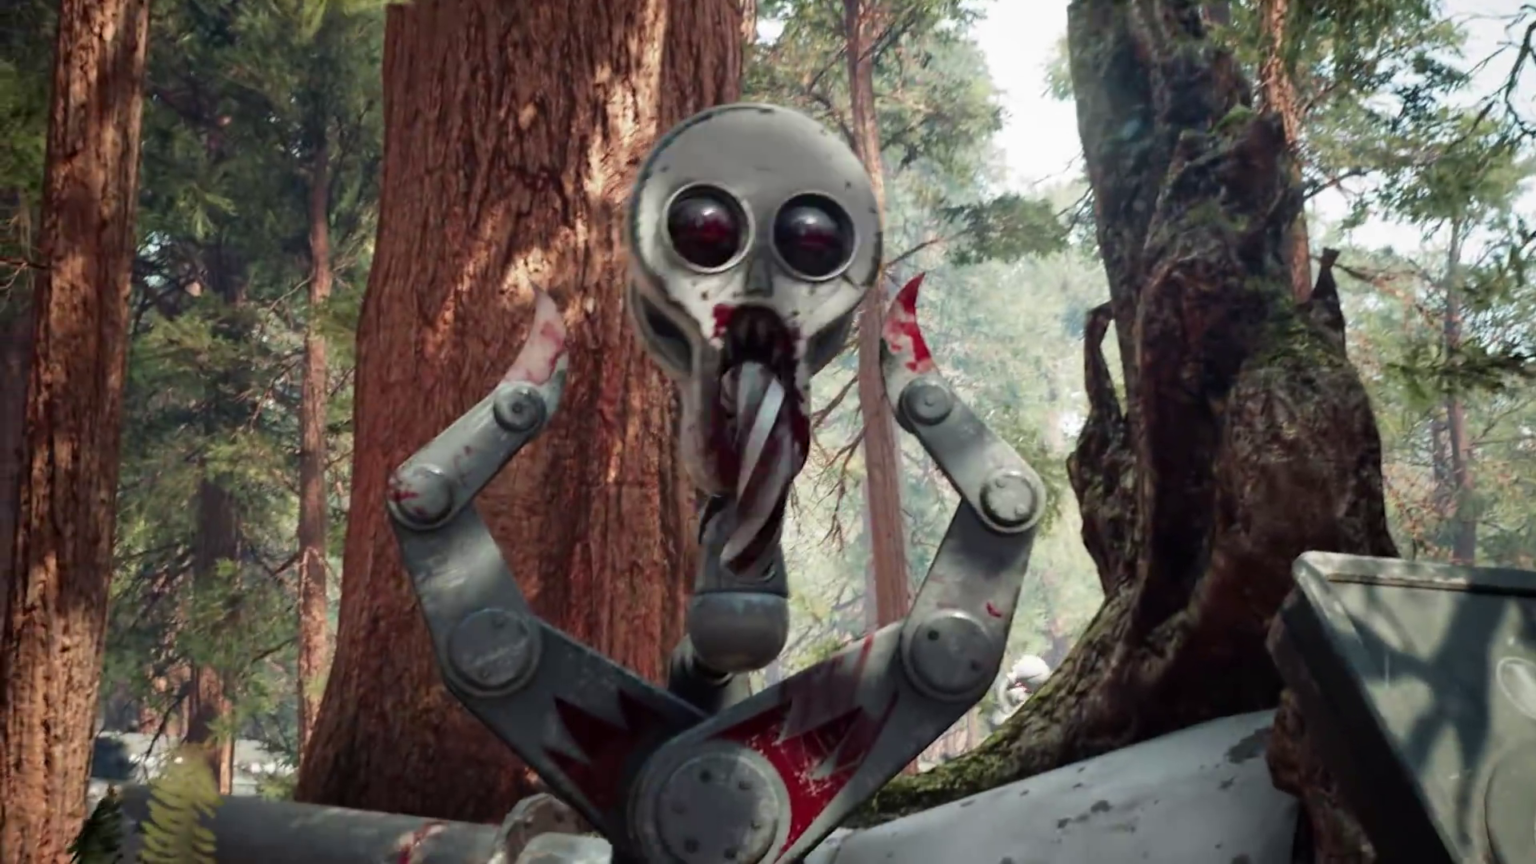 atomic heart xbox release date